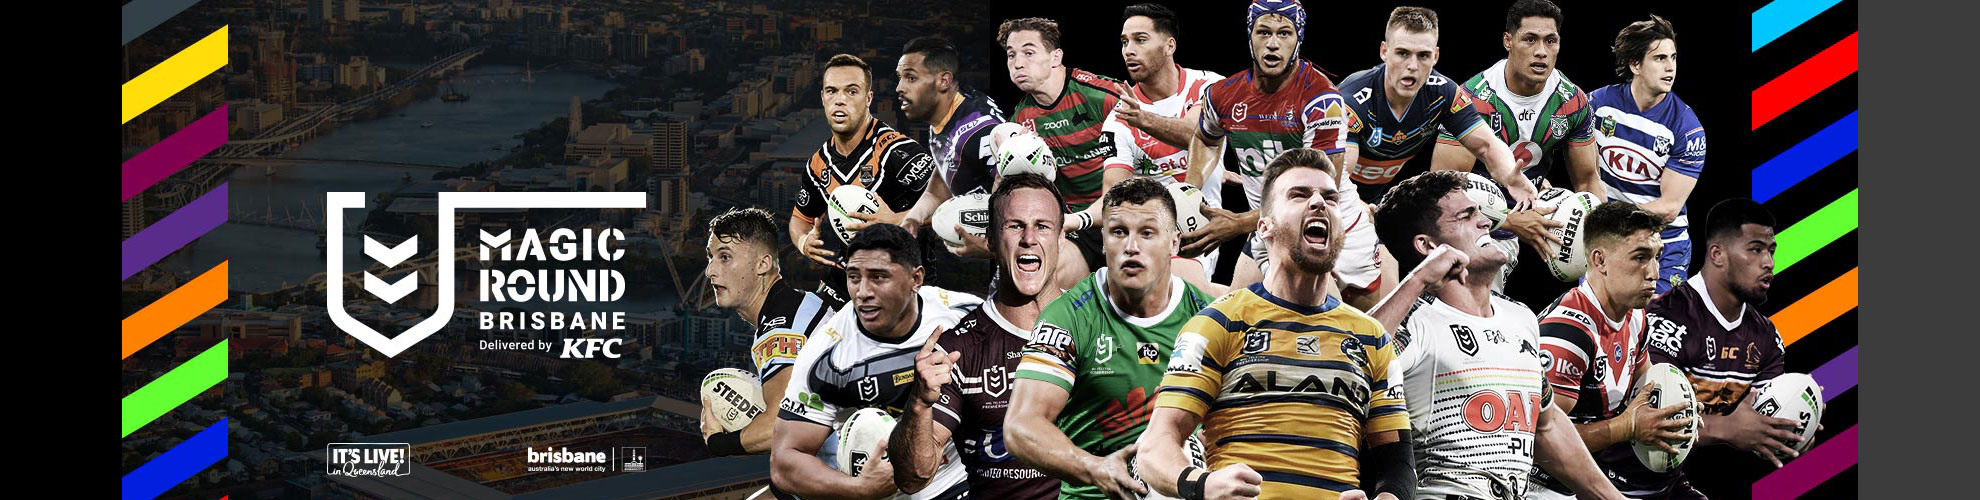 2021 NRL Magic Round Corporate Hospitality Packages at Suncorp